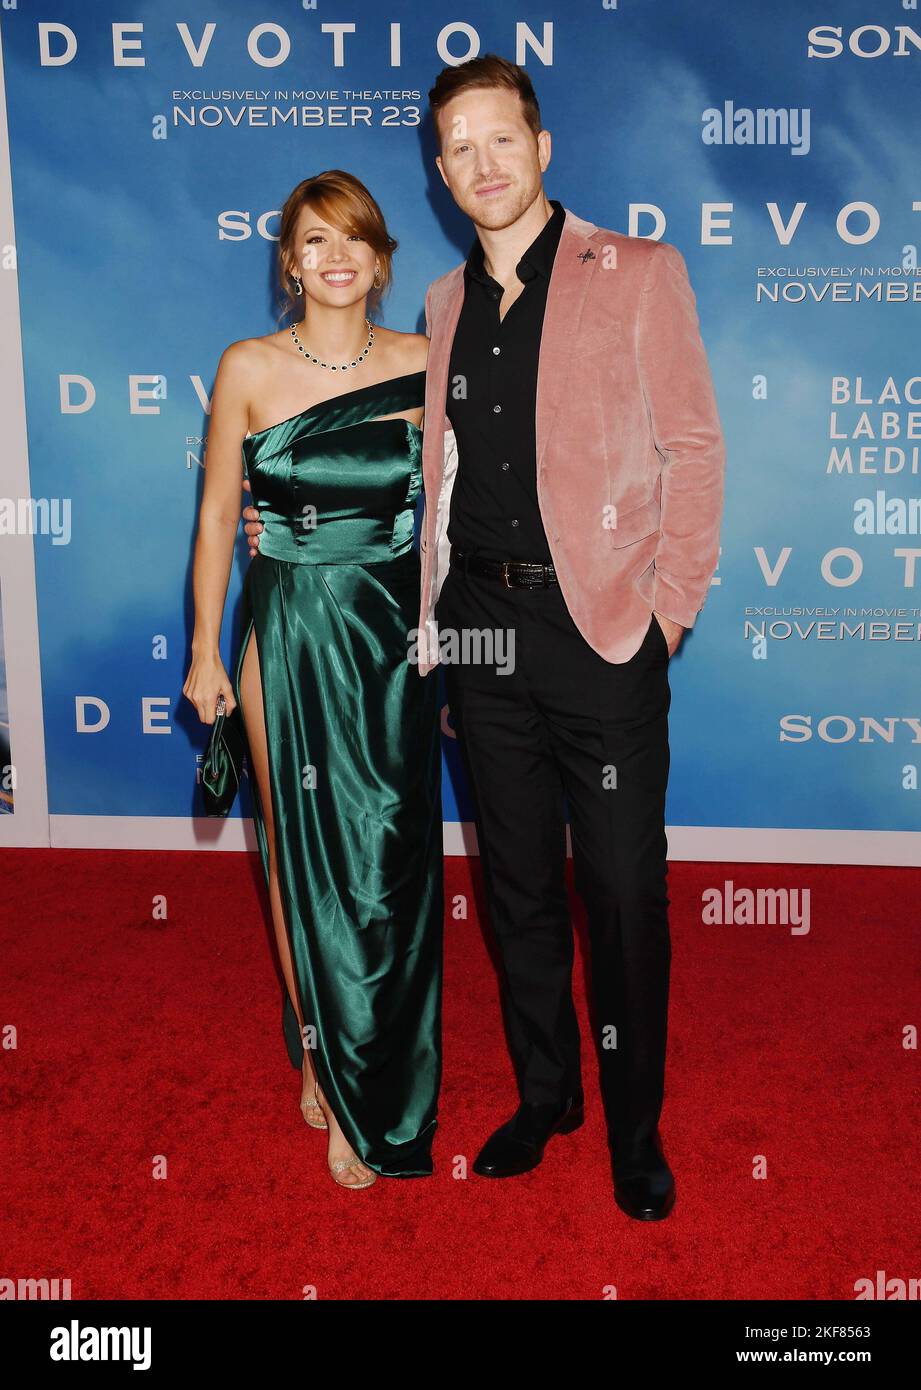 LOS ANGELES, CALIFORNIA - NOVEMBER 15: (L-R) Morgan Lindholm and Boone Platt attend the Los Angeles Premiere Of Sony Pictures' 'Devotion' at Regency V Stock Photo